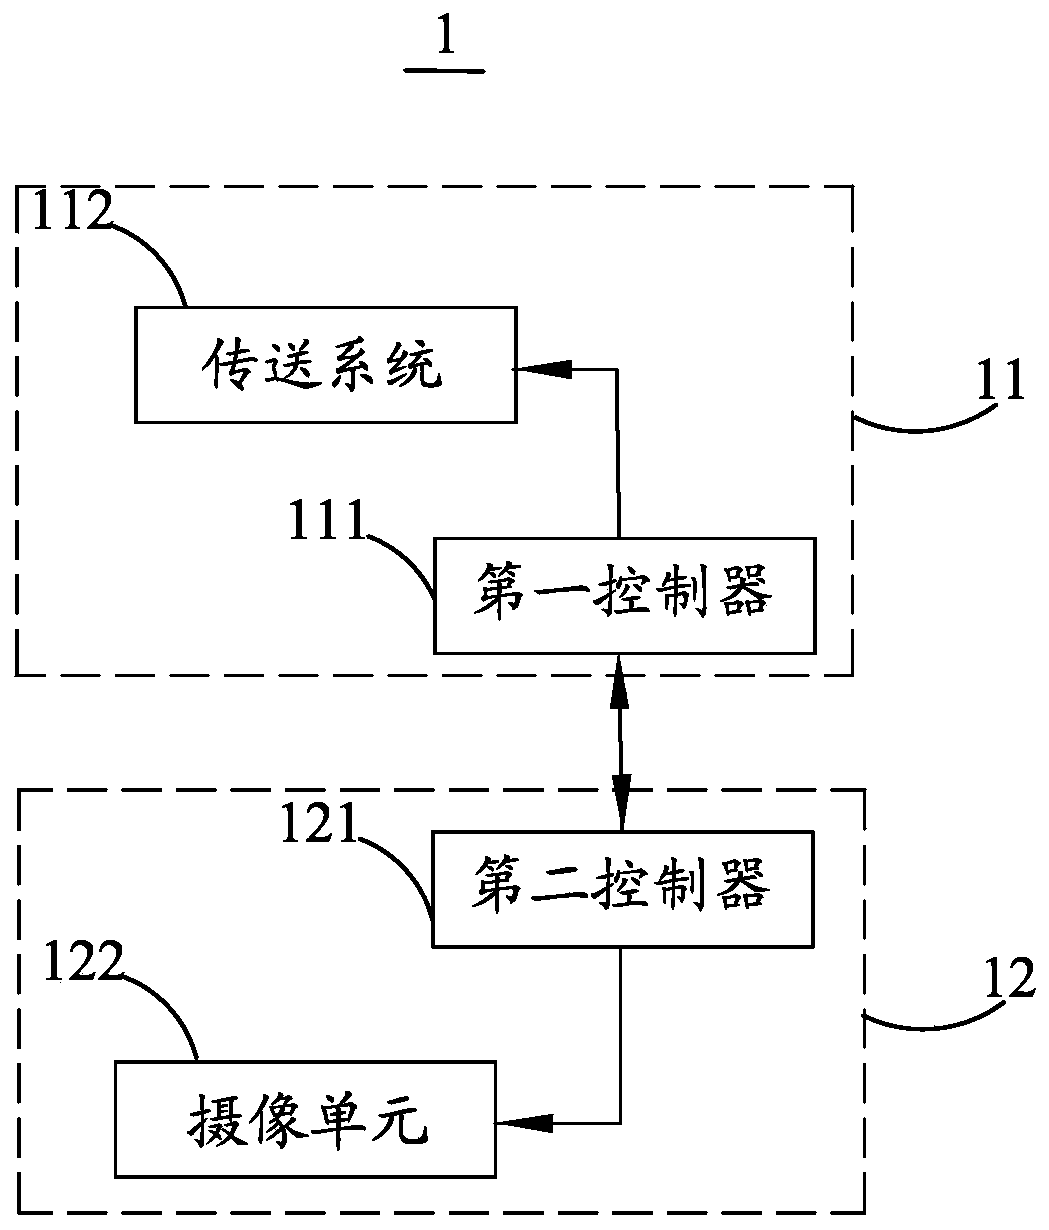 Metal device intelligent quality inspection equipment control system and method based on machine vision and electronic equipment